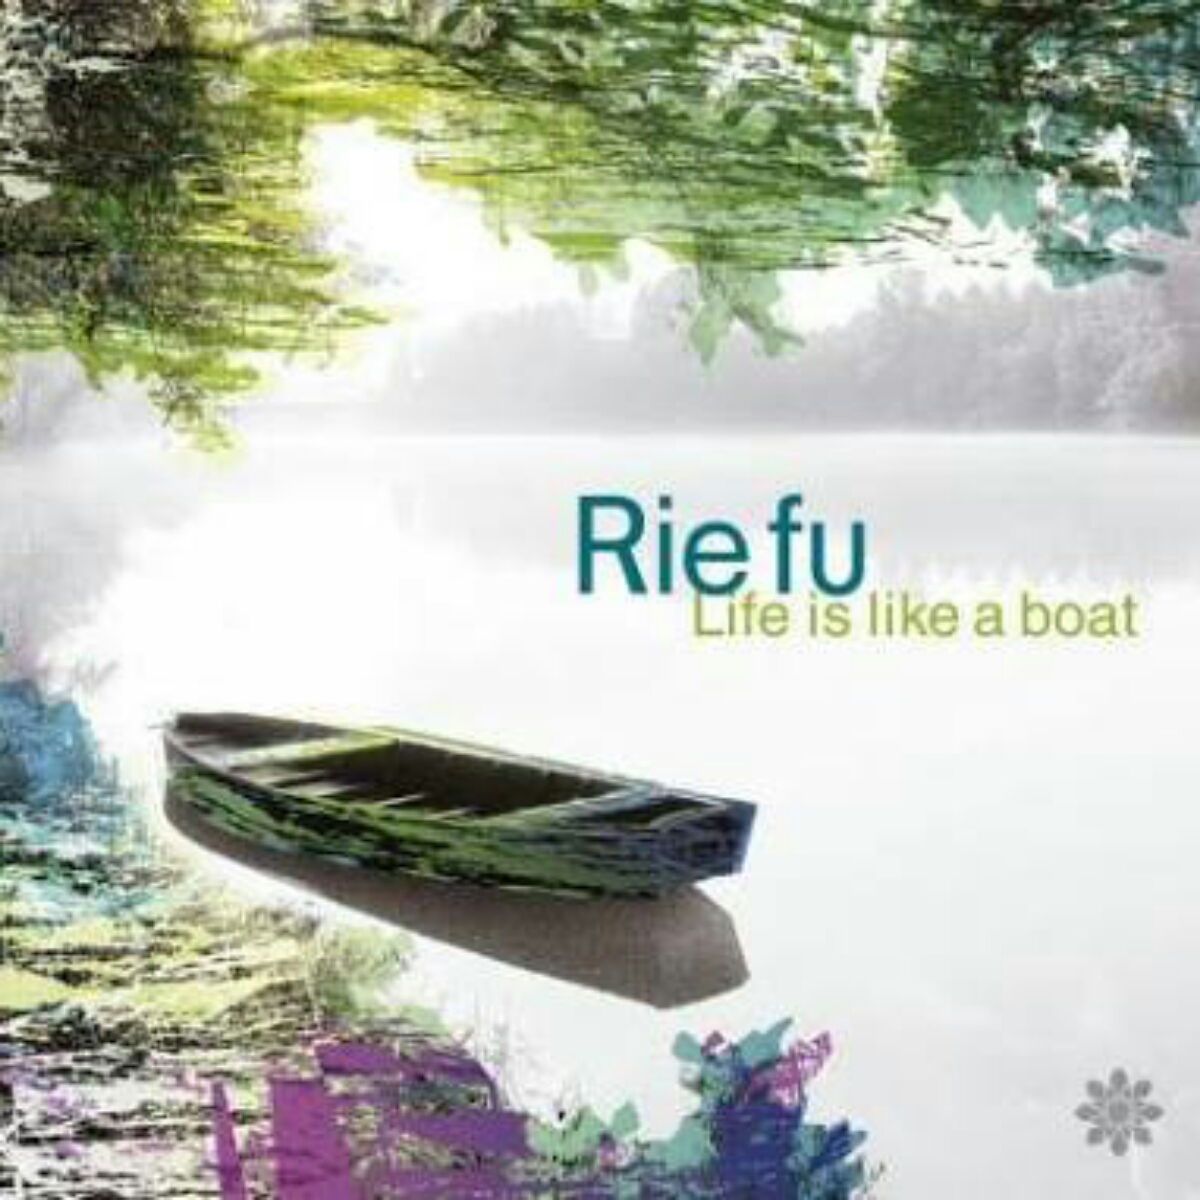 Rie Fu - life is like a boat